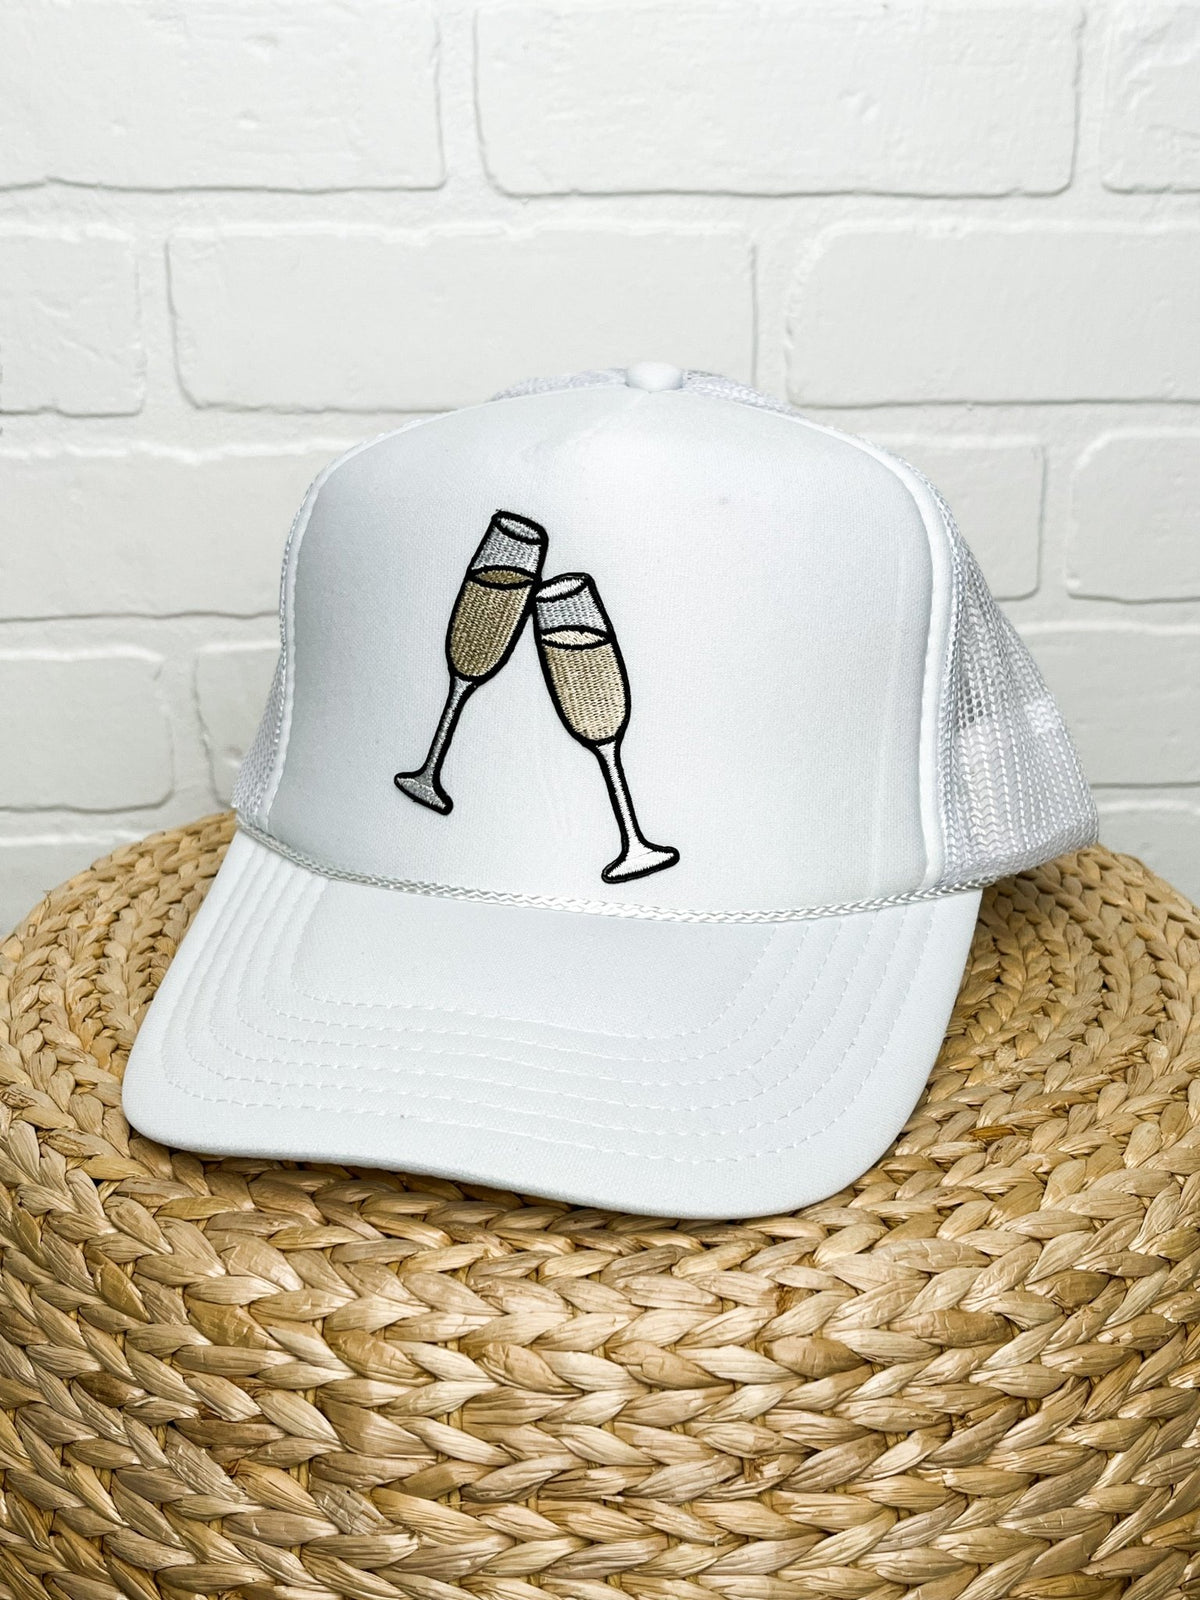 Champagne glasses trucker hat white - Stylish Hat -  Cute Bridal Collection at Lush Fashion Lounge Boutique in Oklahoma City